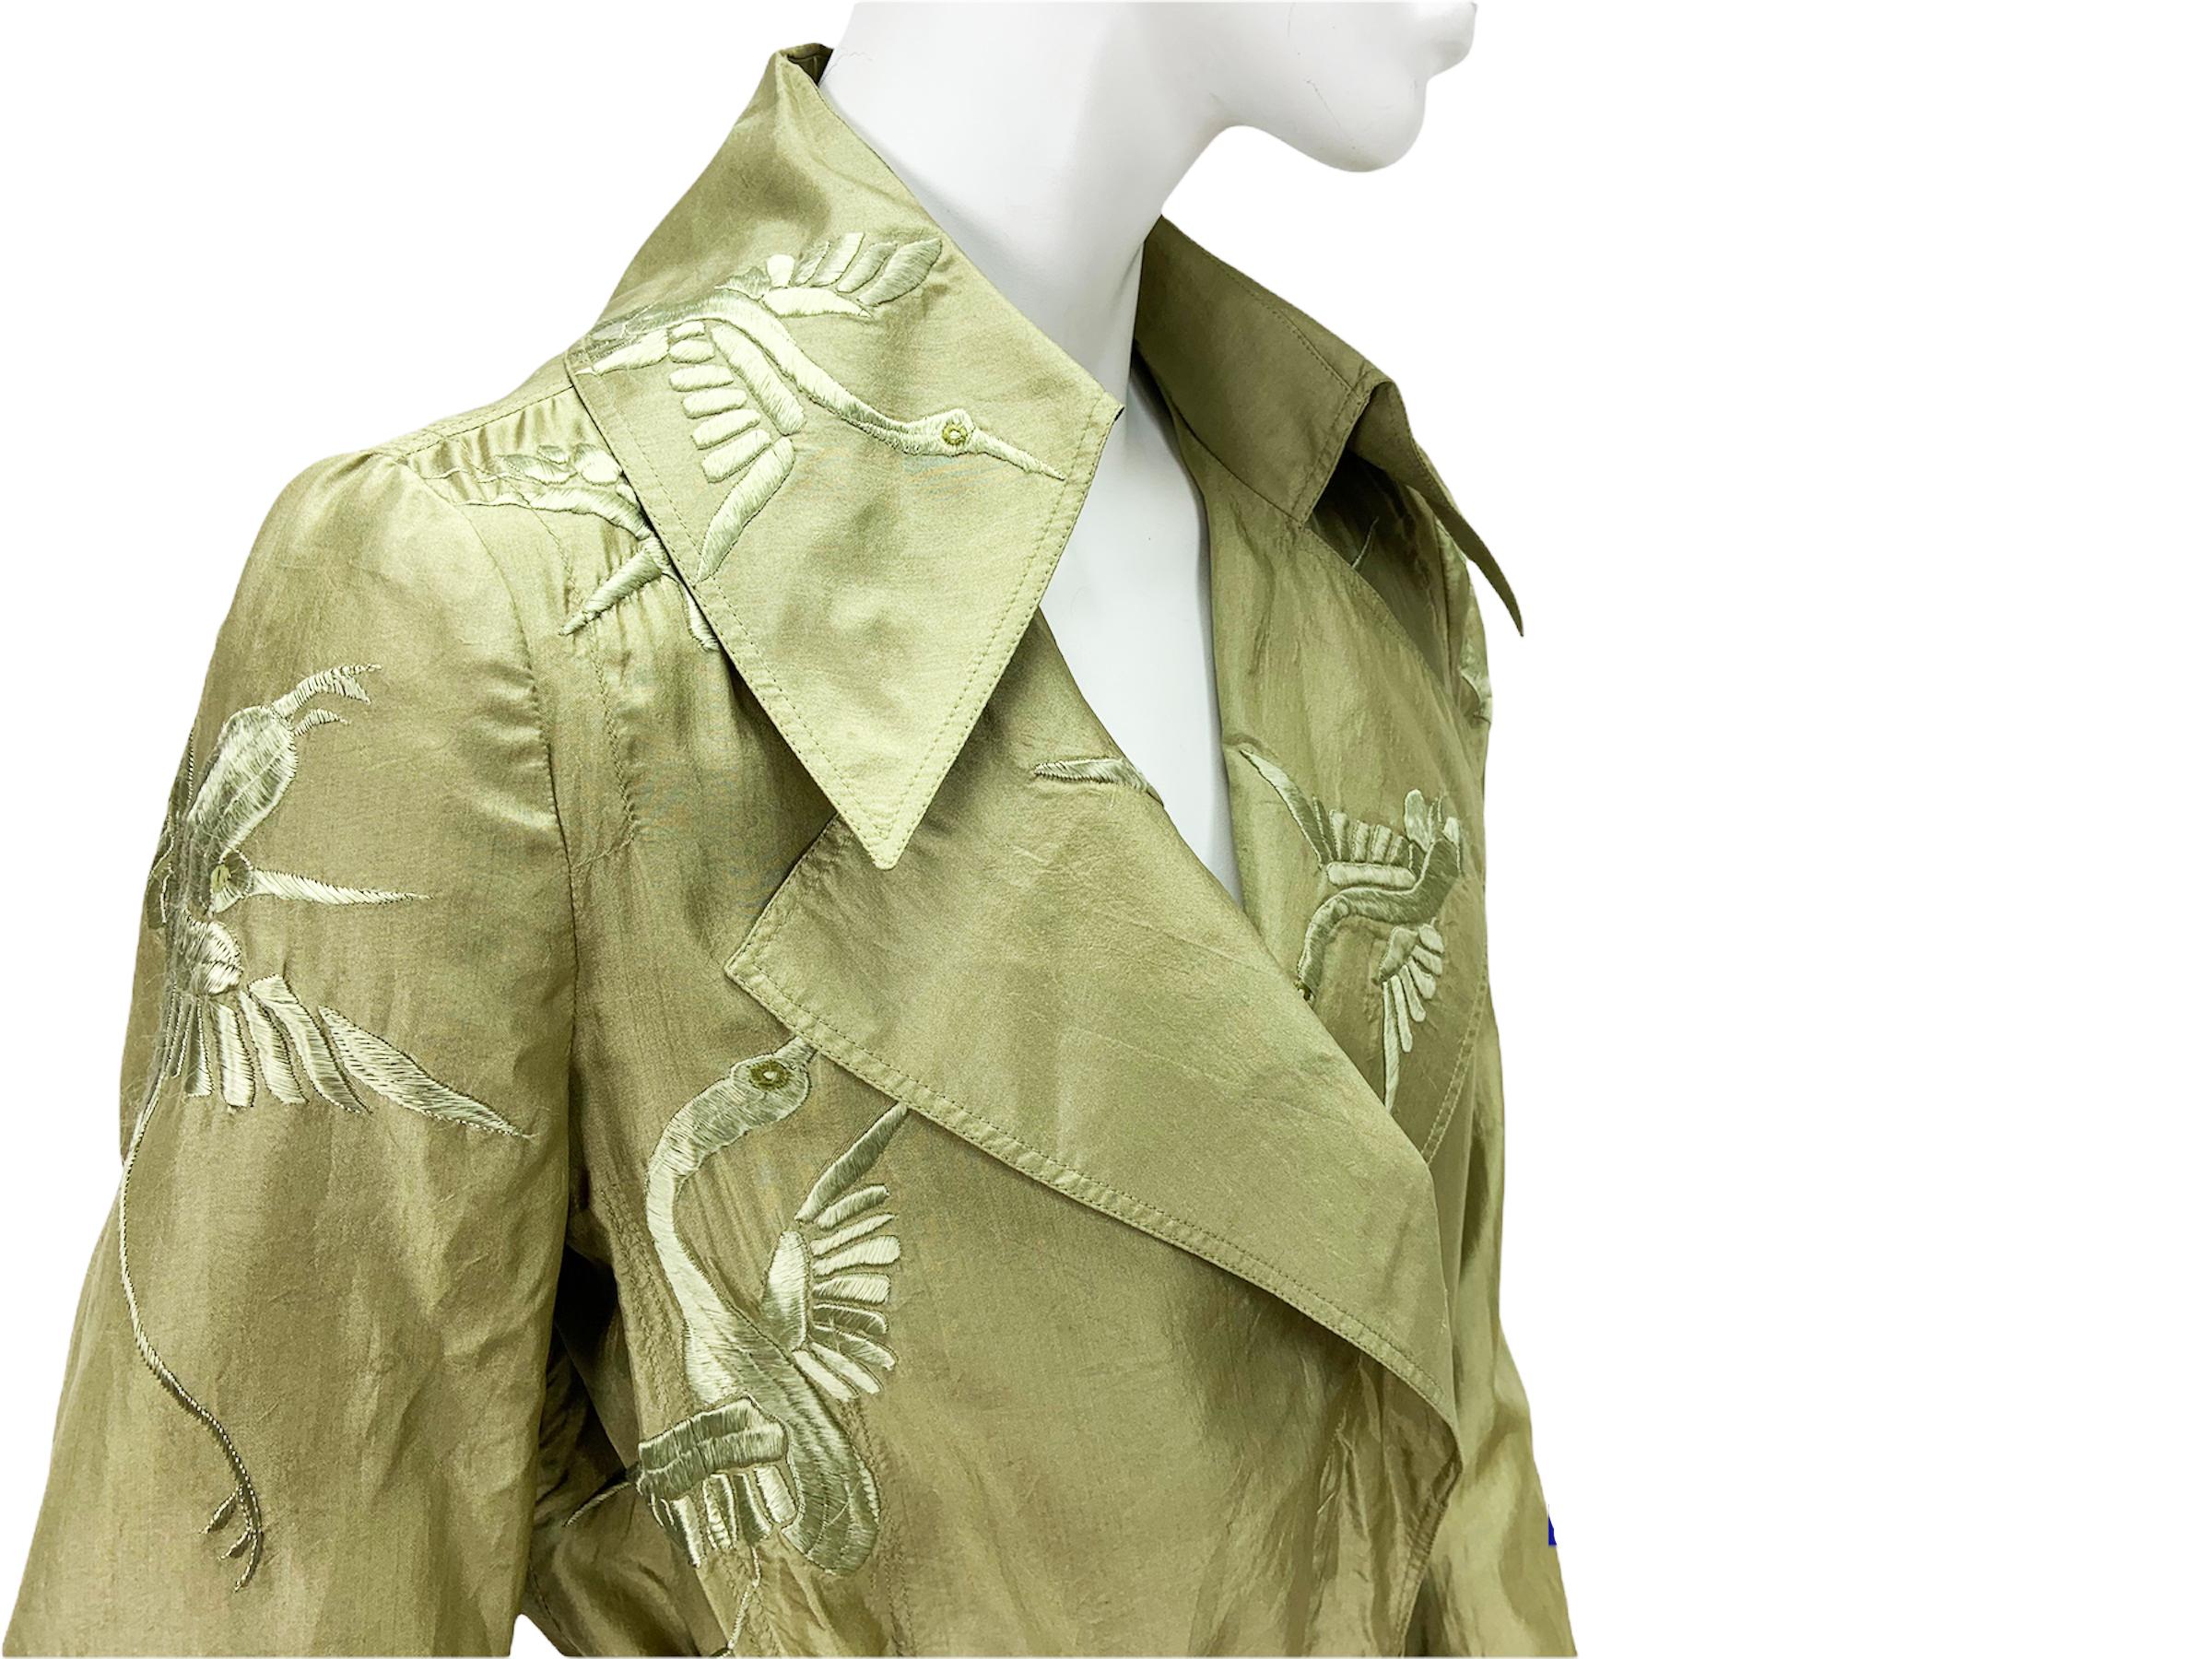 Tom Ford for Gucci S/S 2002 Green Silk Crane Birds Embroidery Trench Coat  In Excellent Condition For Sale In Montgomery, TX